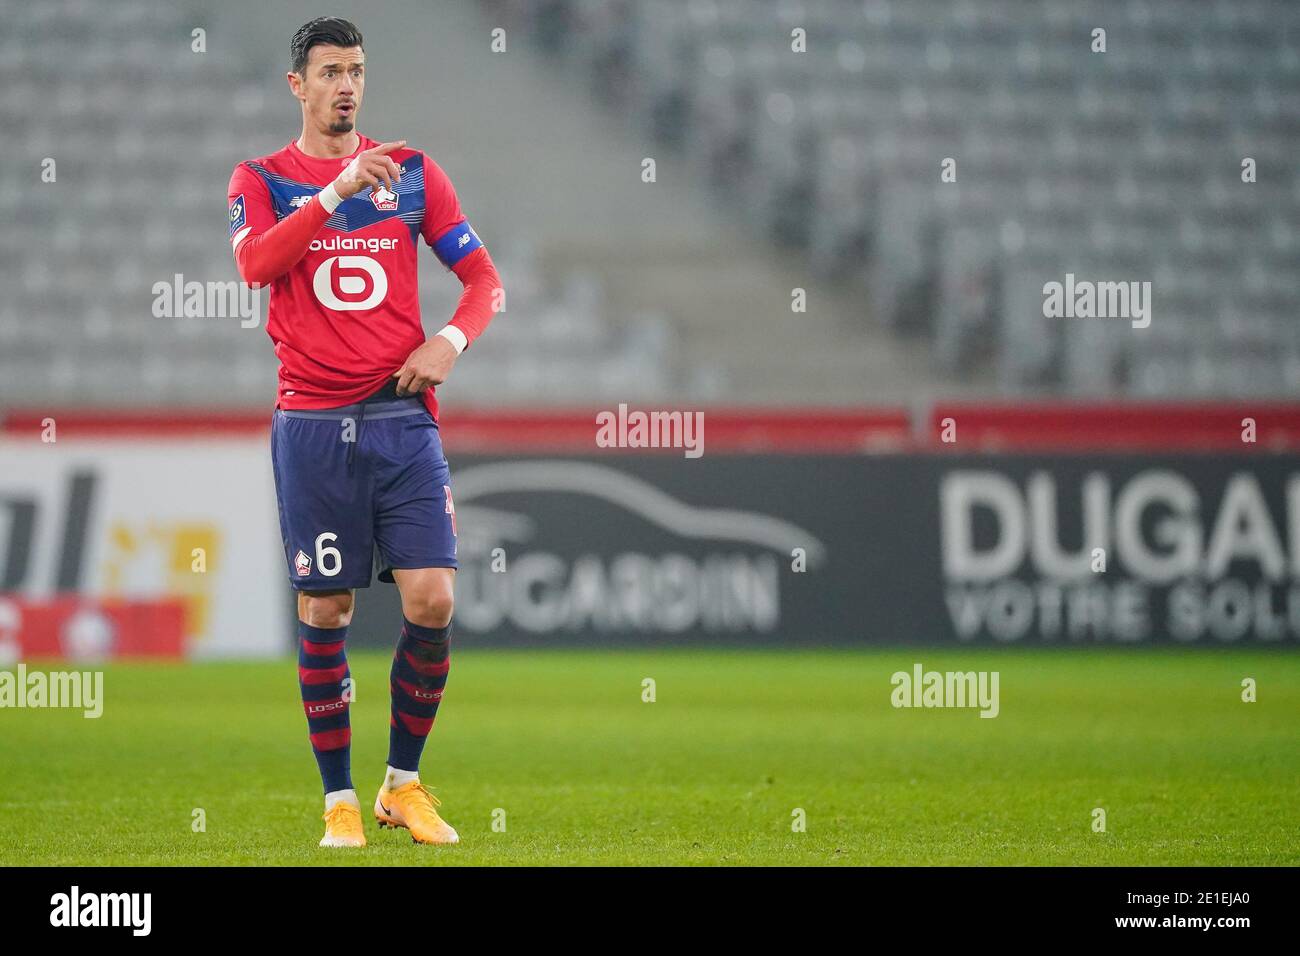 LILLE, FRANCE - JANUARY 6: Jose Fonte of Lille OSC during the Ligue 1 match between Lille OSC and Angers SCO at Stade Pierre Mauroy on January 6, 2021 in Lille, France (Photo by Jeroen Meuwsen/BSR Agency/Alamy Live News)*** Local Caption *** Jose Fonte Stock Photo